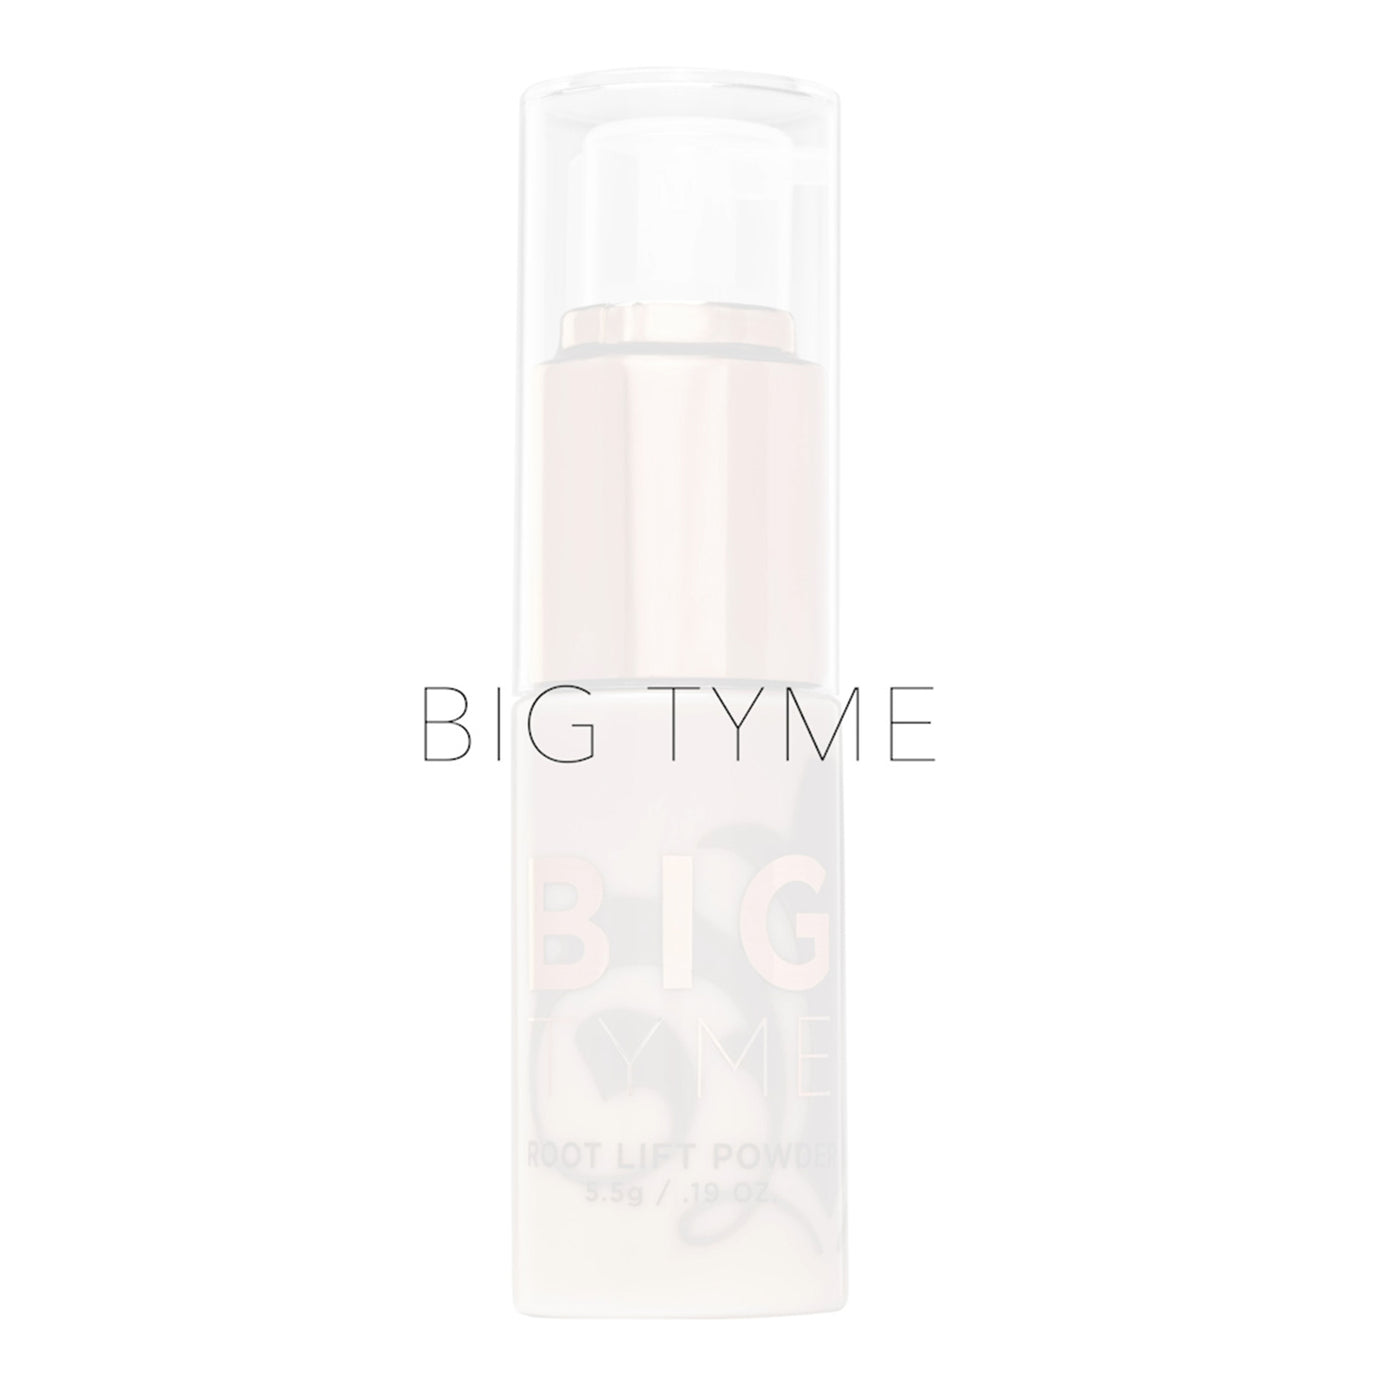 TYME Inventor and CEO, Jacynda Smith says BigTYME Root Lift Powder Spray is a lightweight buildable volumizing hair styling product.